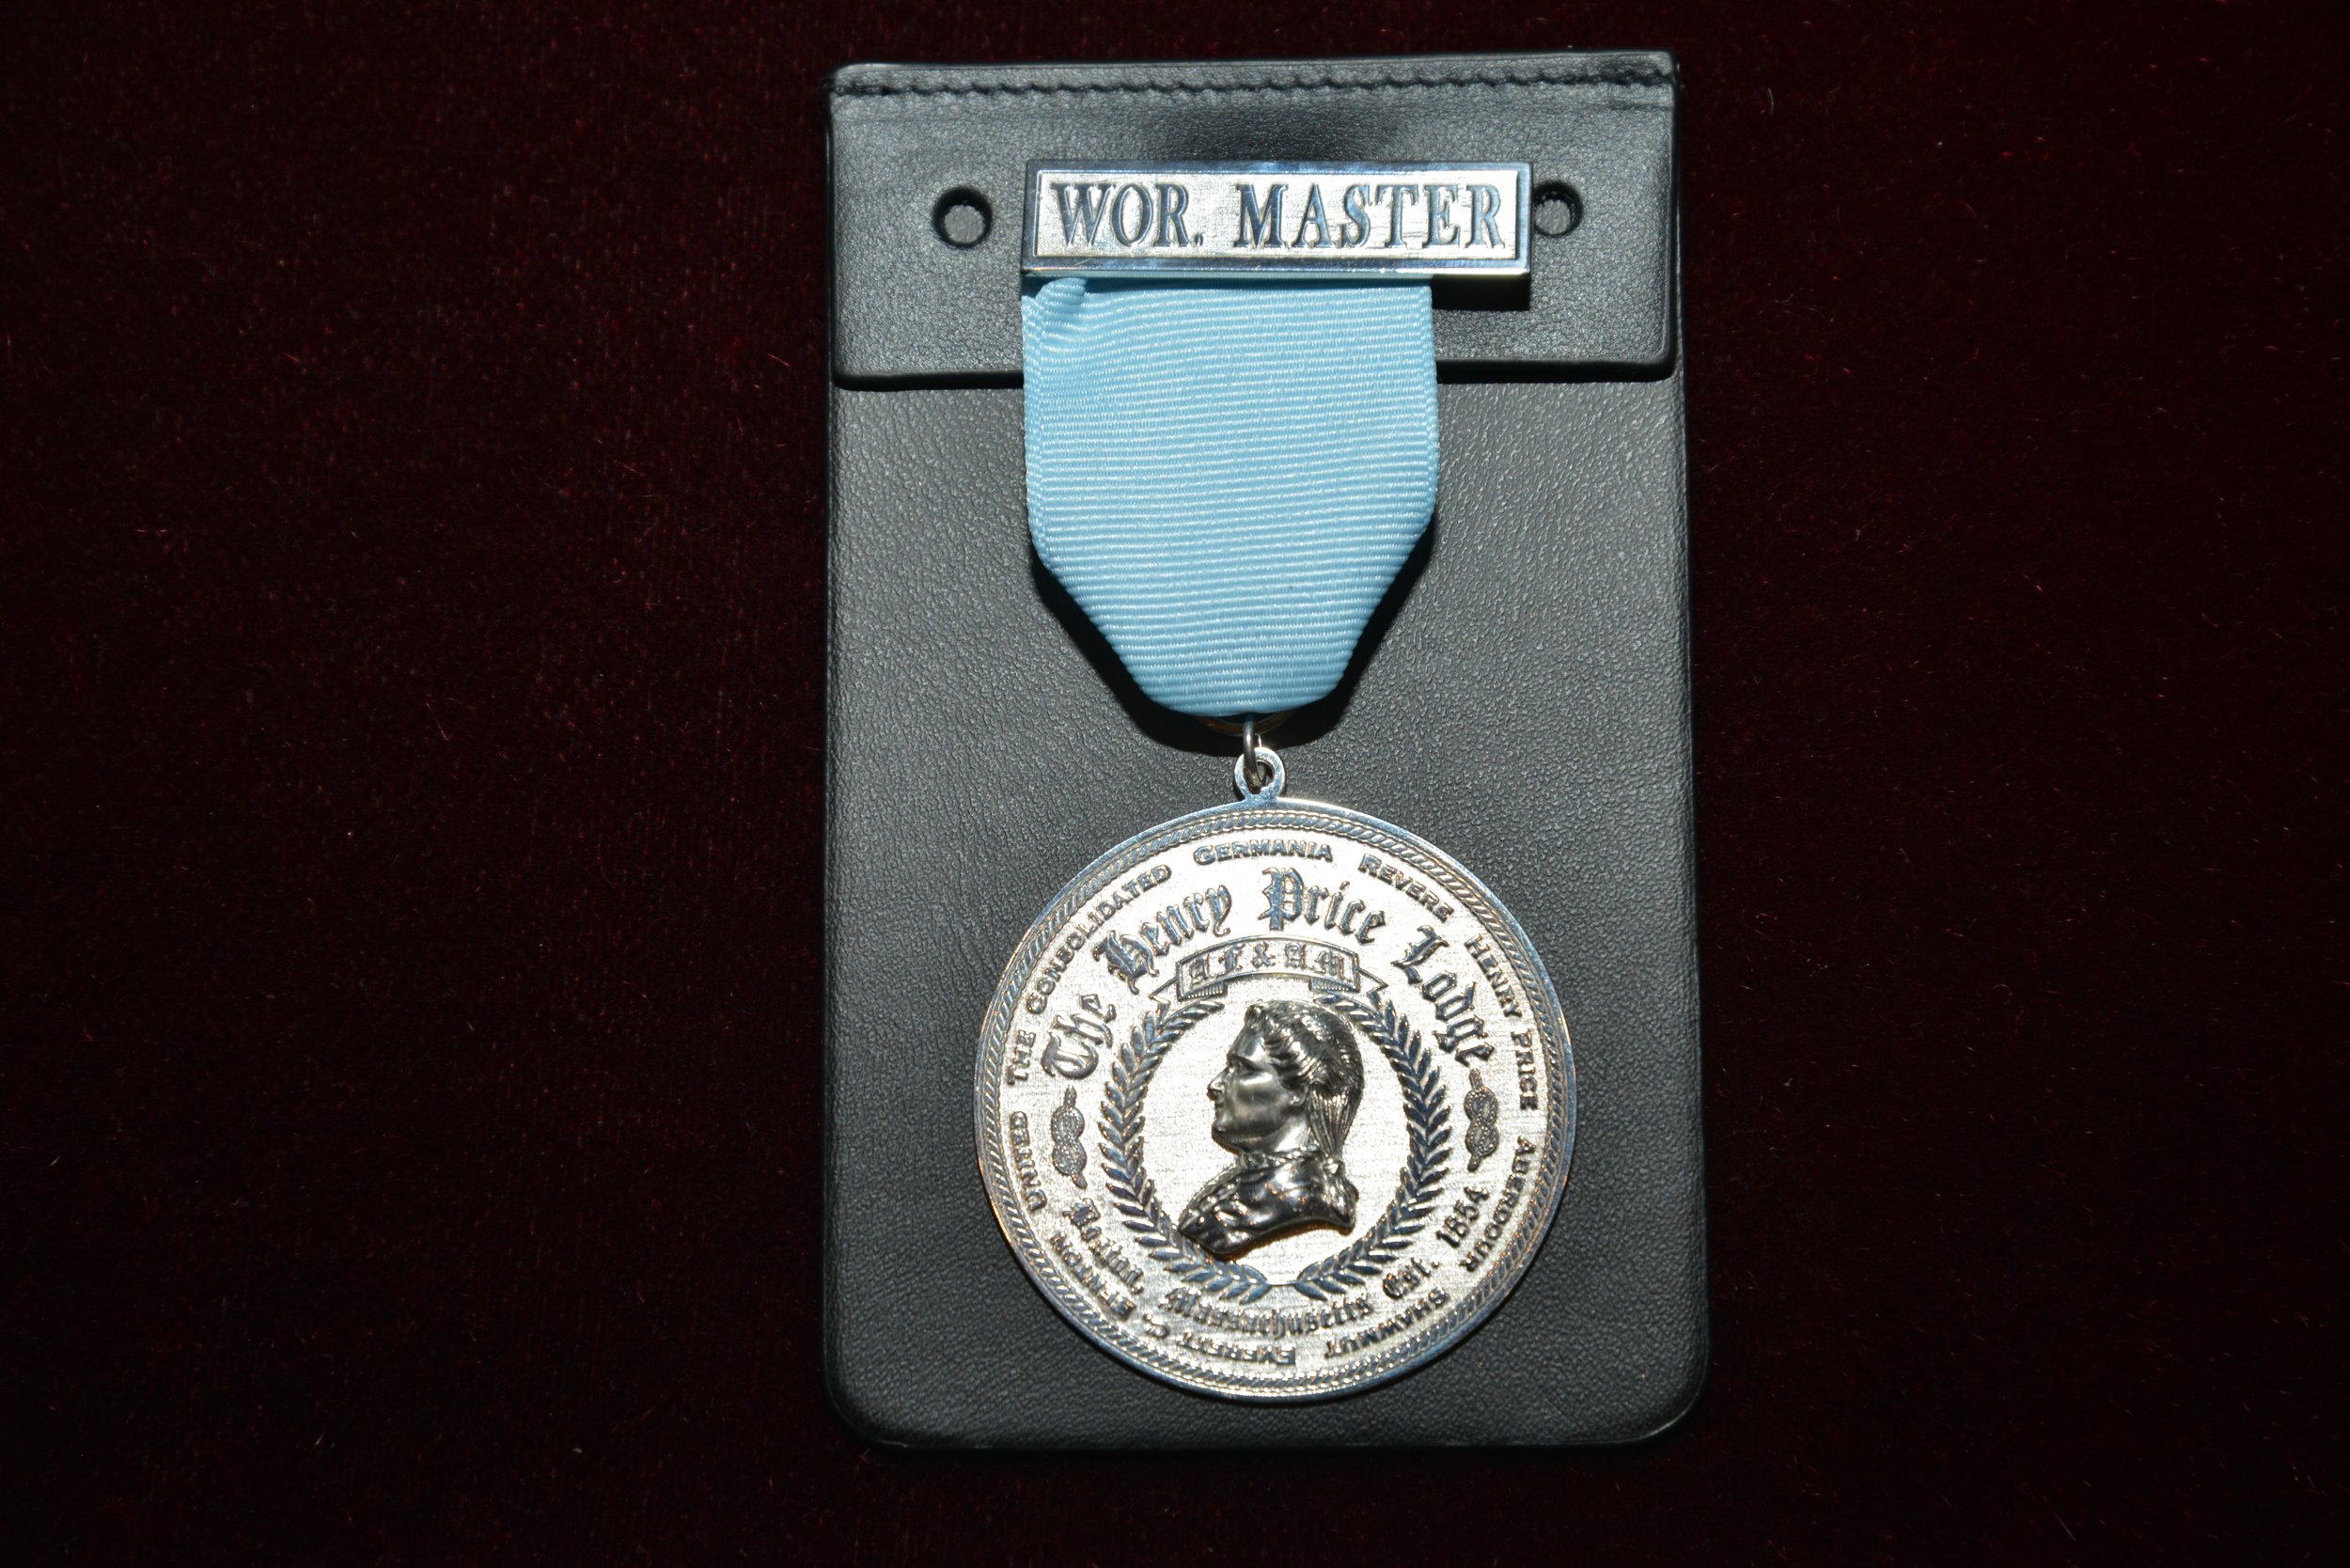  The Henry Price Lodge breast jewel for the Worshipful Master 